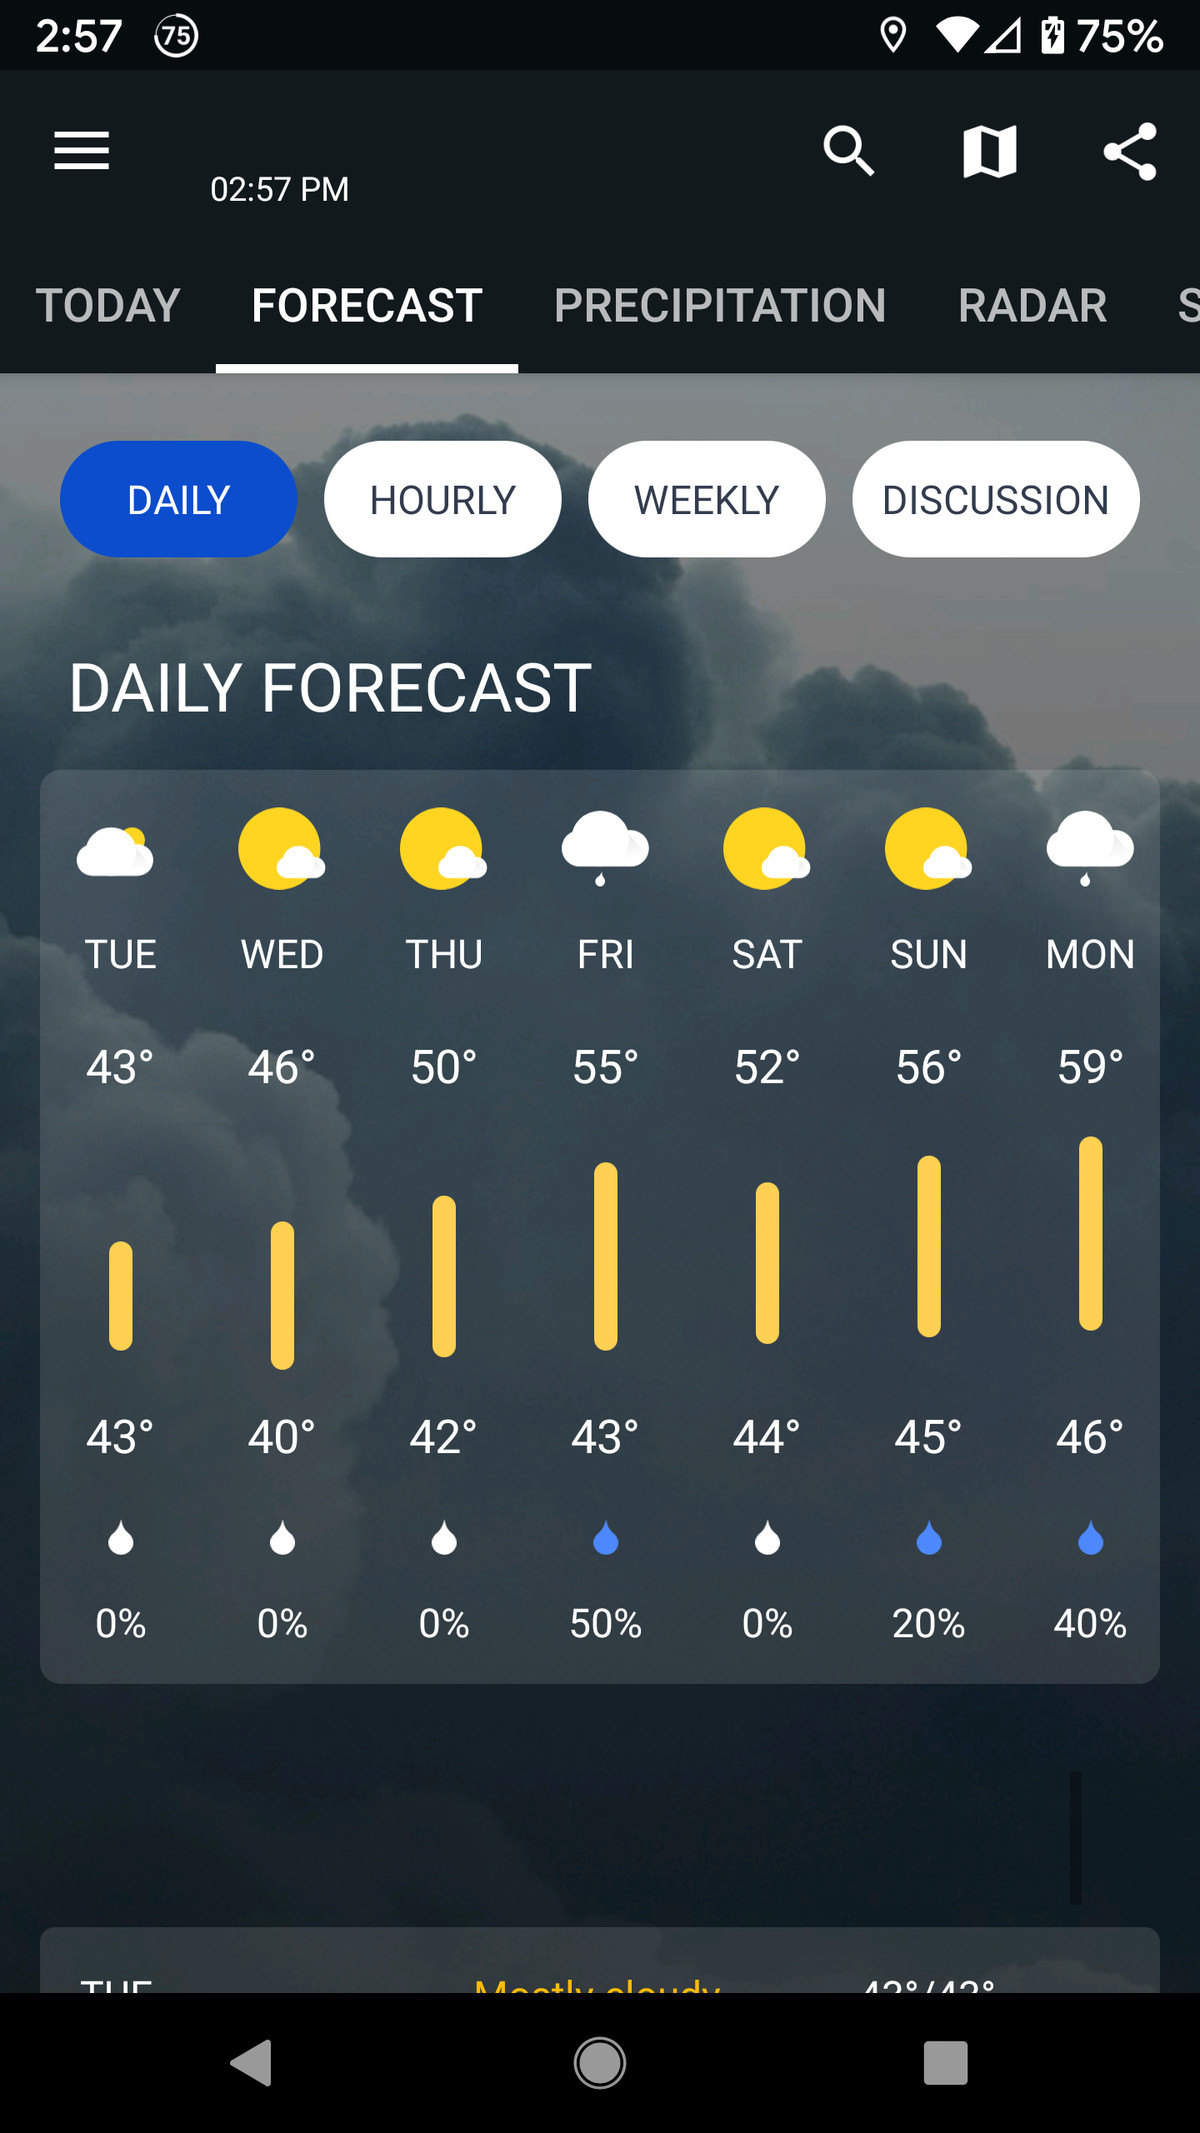 1Weather gets its info using the Weather2020 platform.